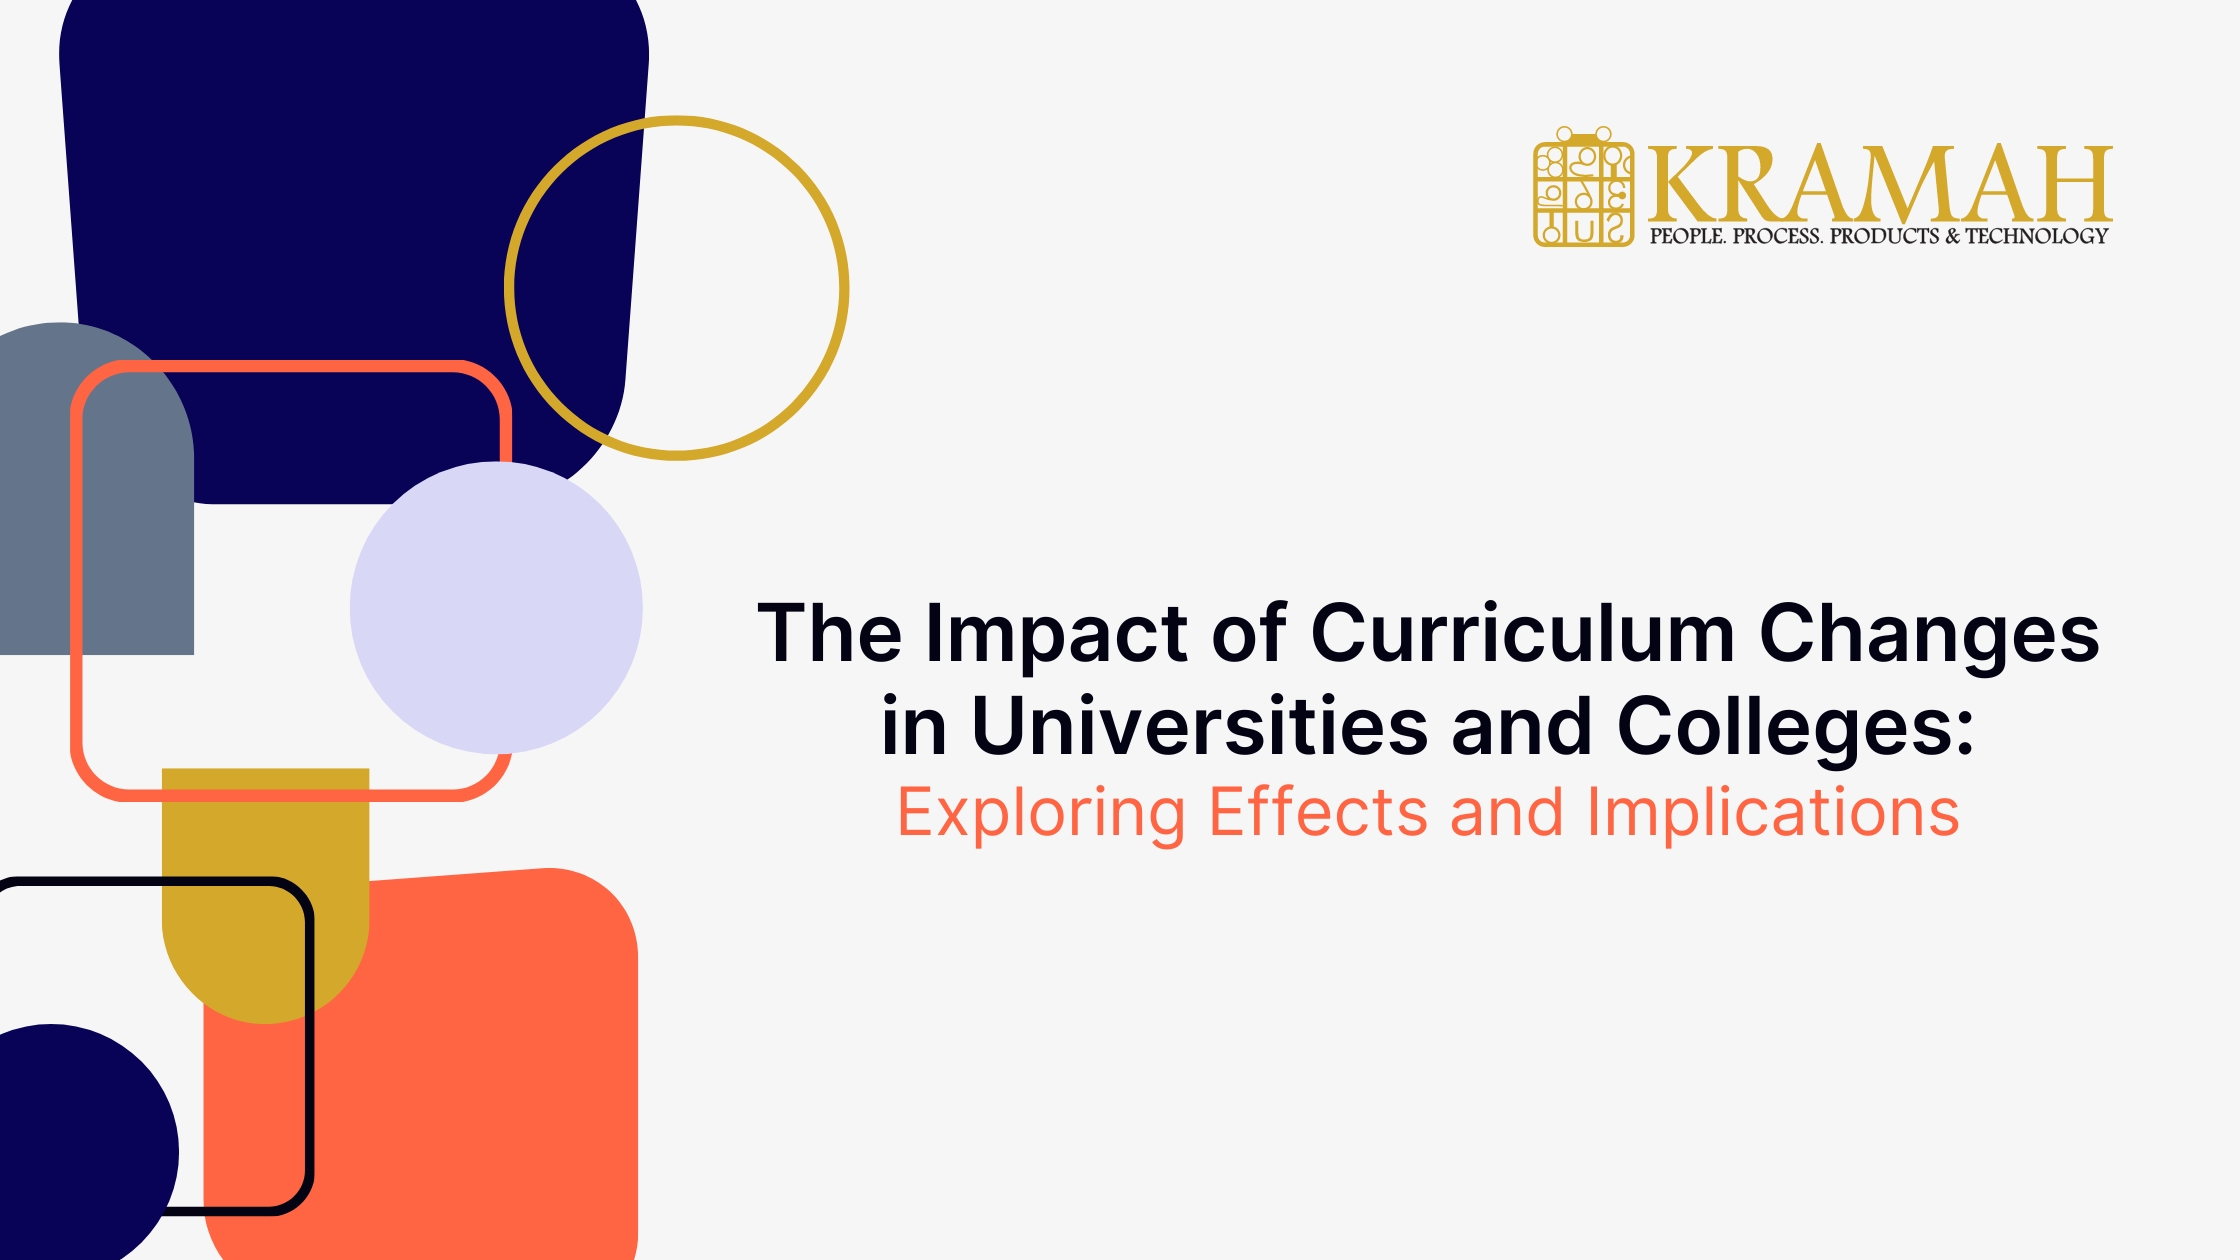 The Impact of Curriculum Changes in Universities and Colleges